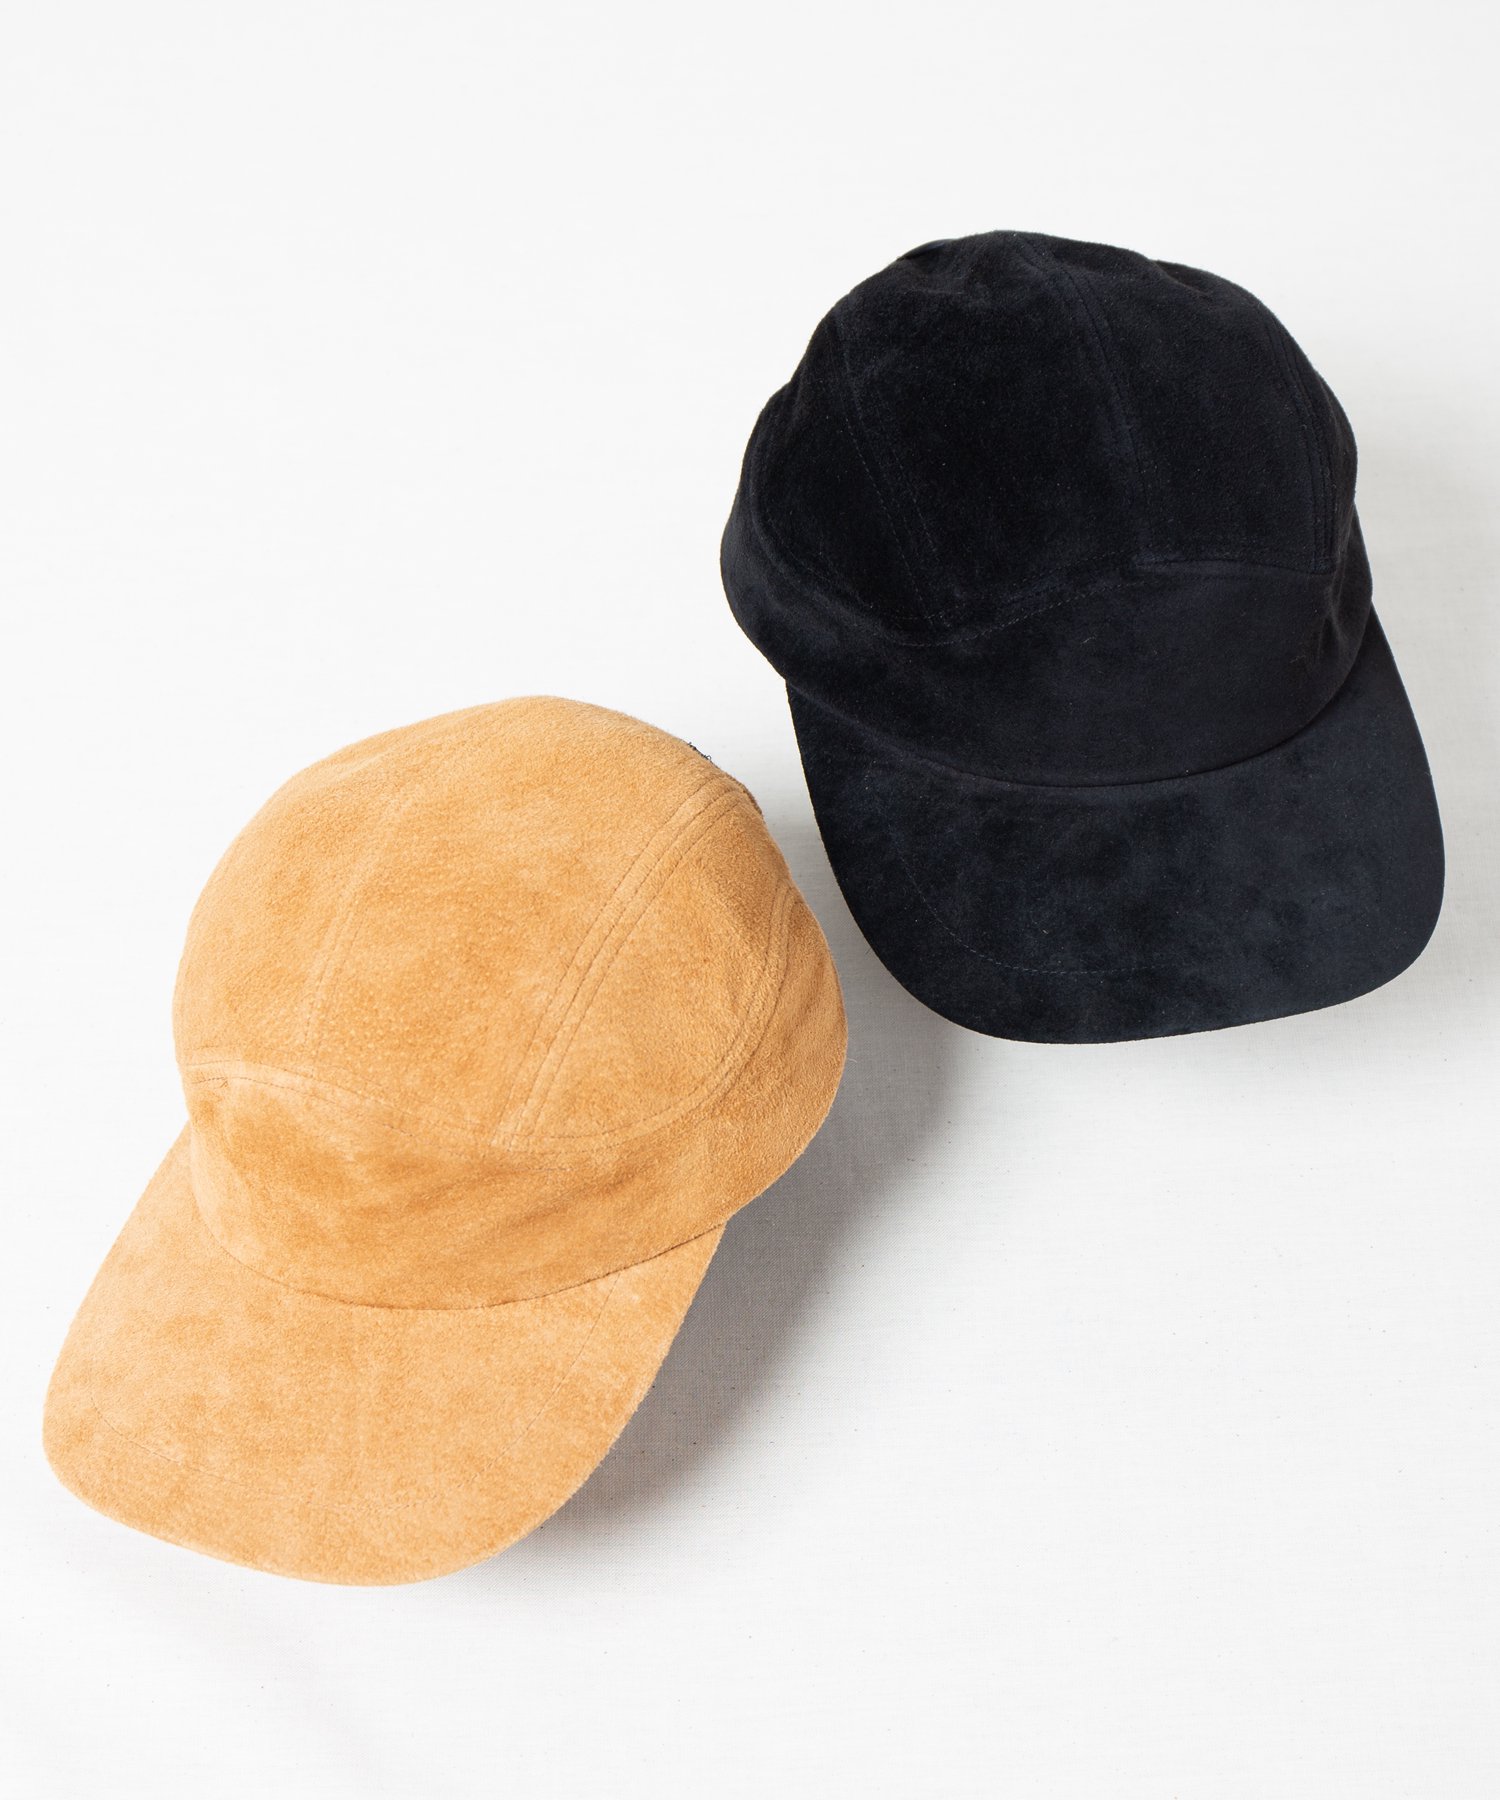 <img class='new_mark_img1' src='https://img.shop-pro.jp/img/new/icons20.gif' style='border:none;display:inline;margin:0px;padding:0px;width:auto;' />【Indietro Association】 Leather Jet Cap / レザージェットキャップ